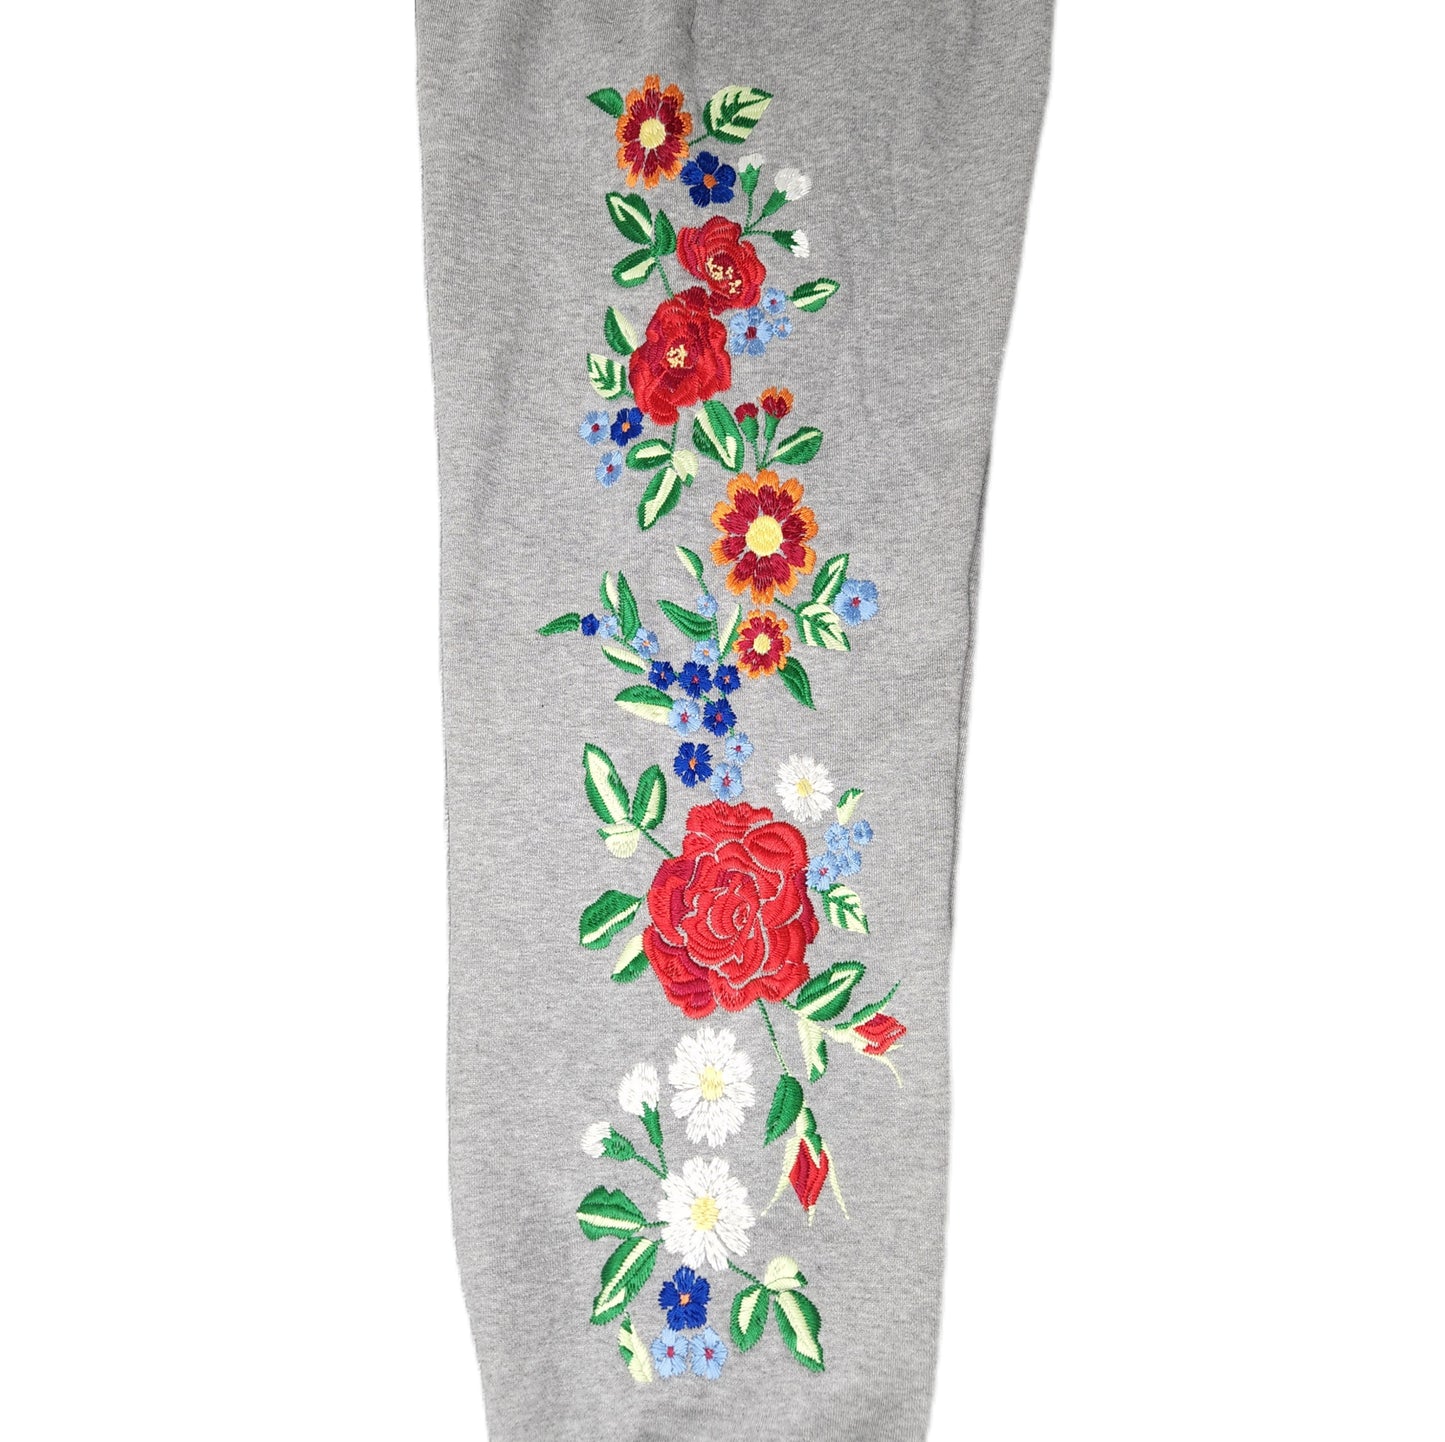 ＜GENDERLESS＞EMBROIDERED SWEATPANT